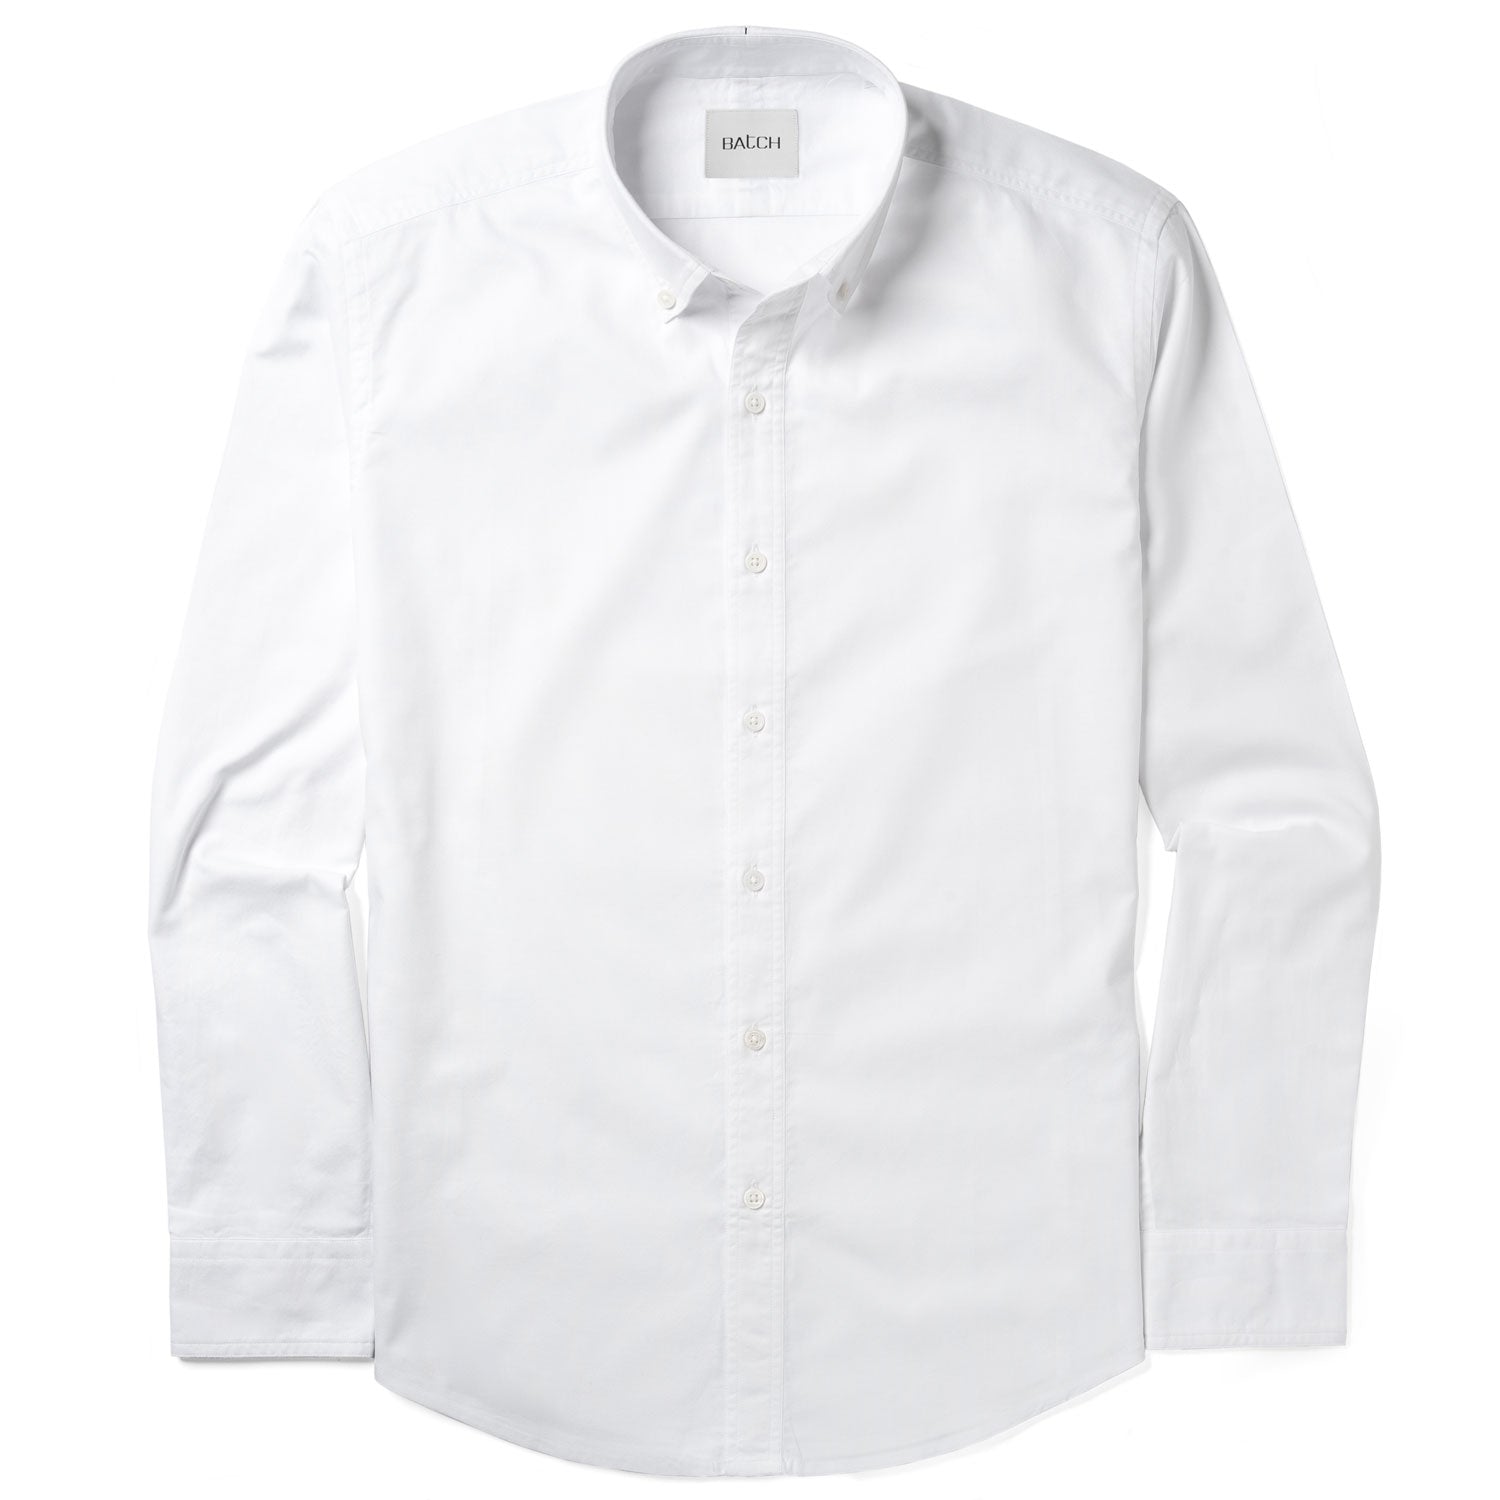 Essential Casual Shirt - Classic White Cotton Oxford